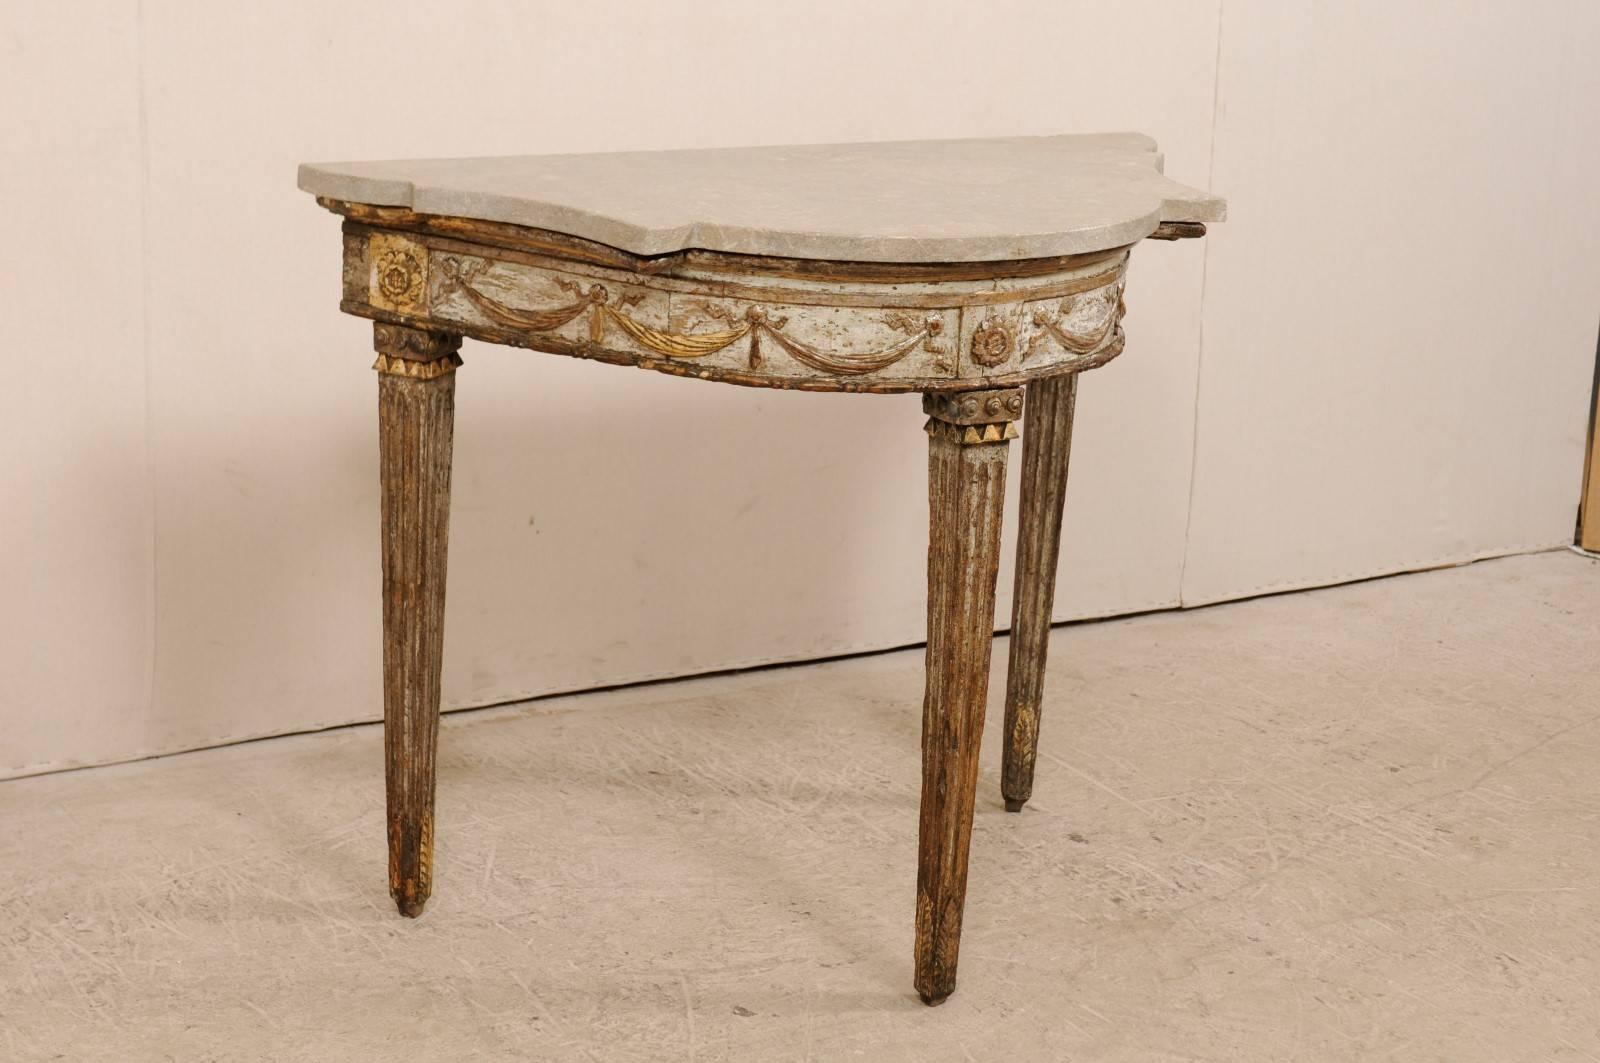 Carved Exquisite Italian 18th Century Giltwood Demilune with Fossilized Granite Top